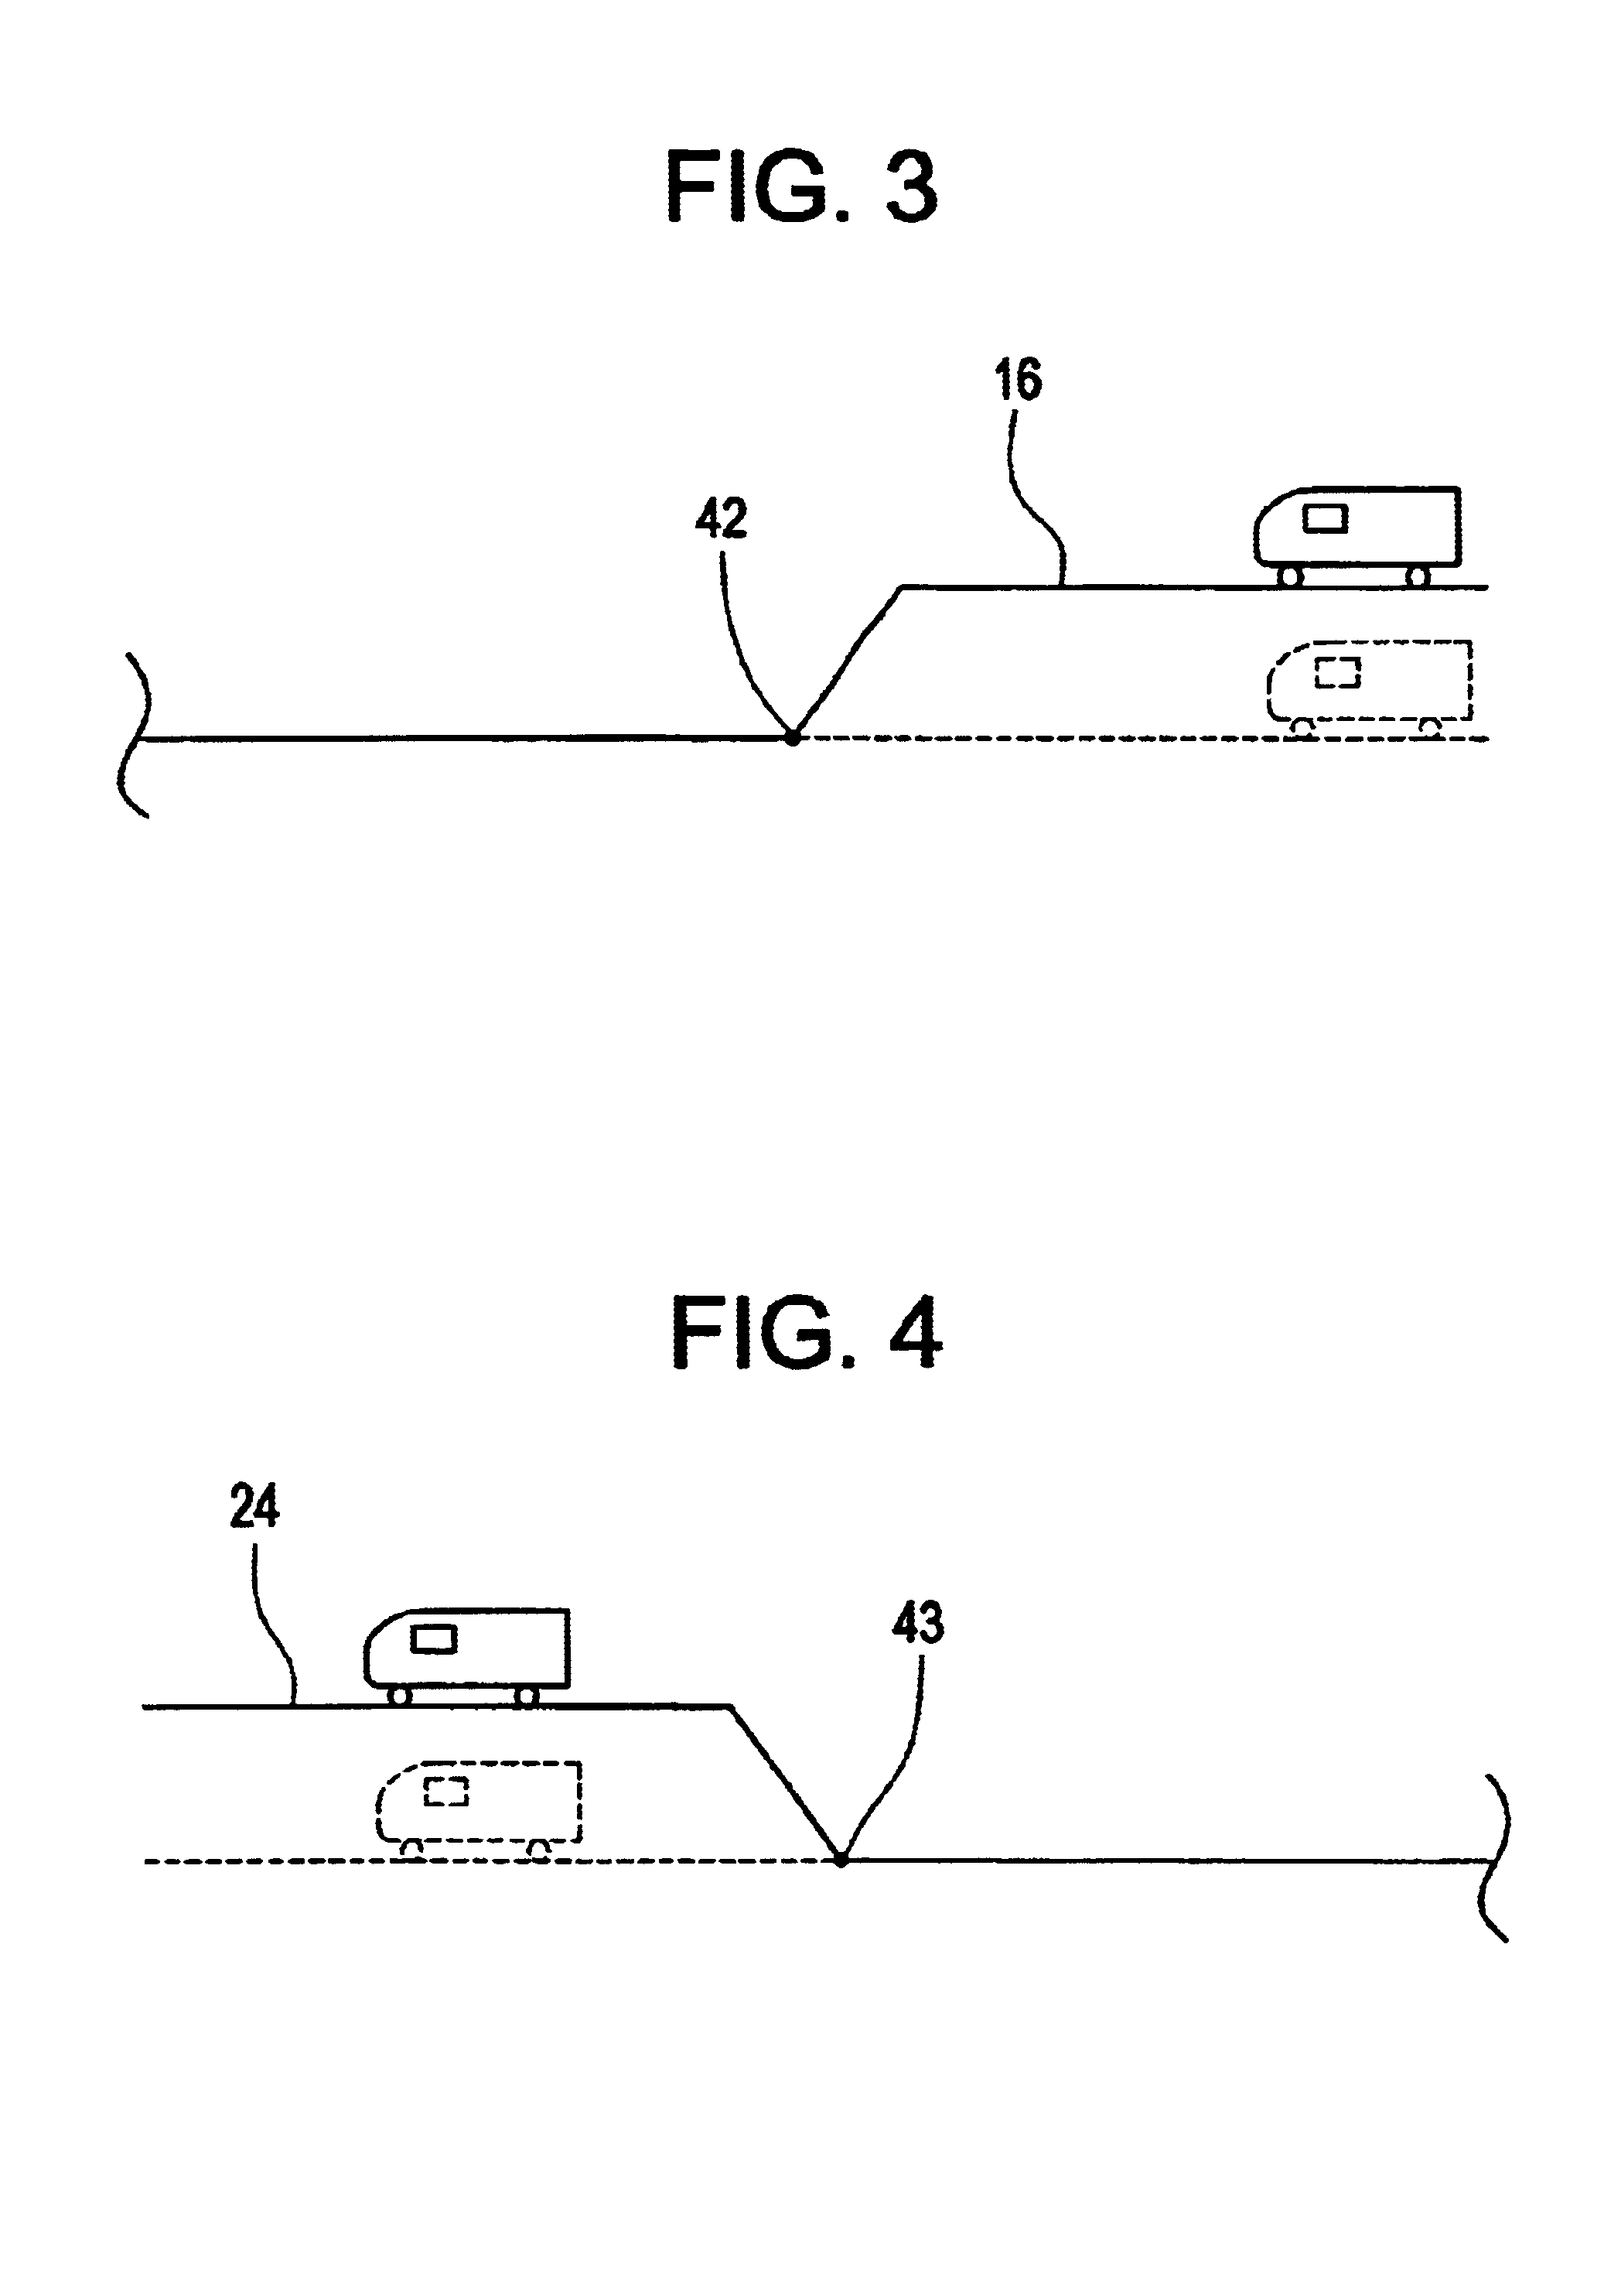 System for managing the route of a rail vehicle